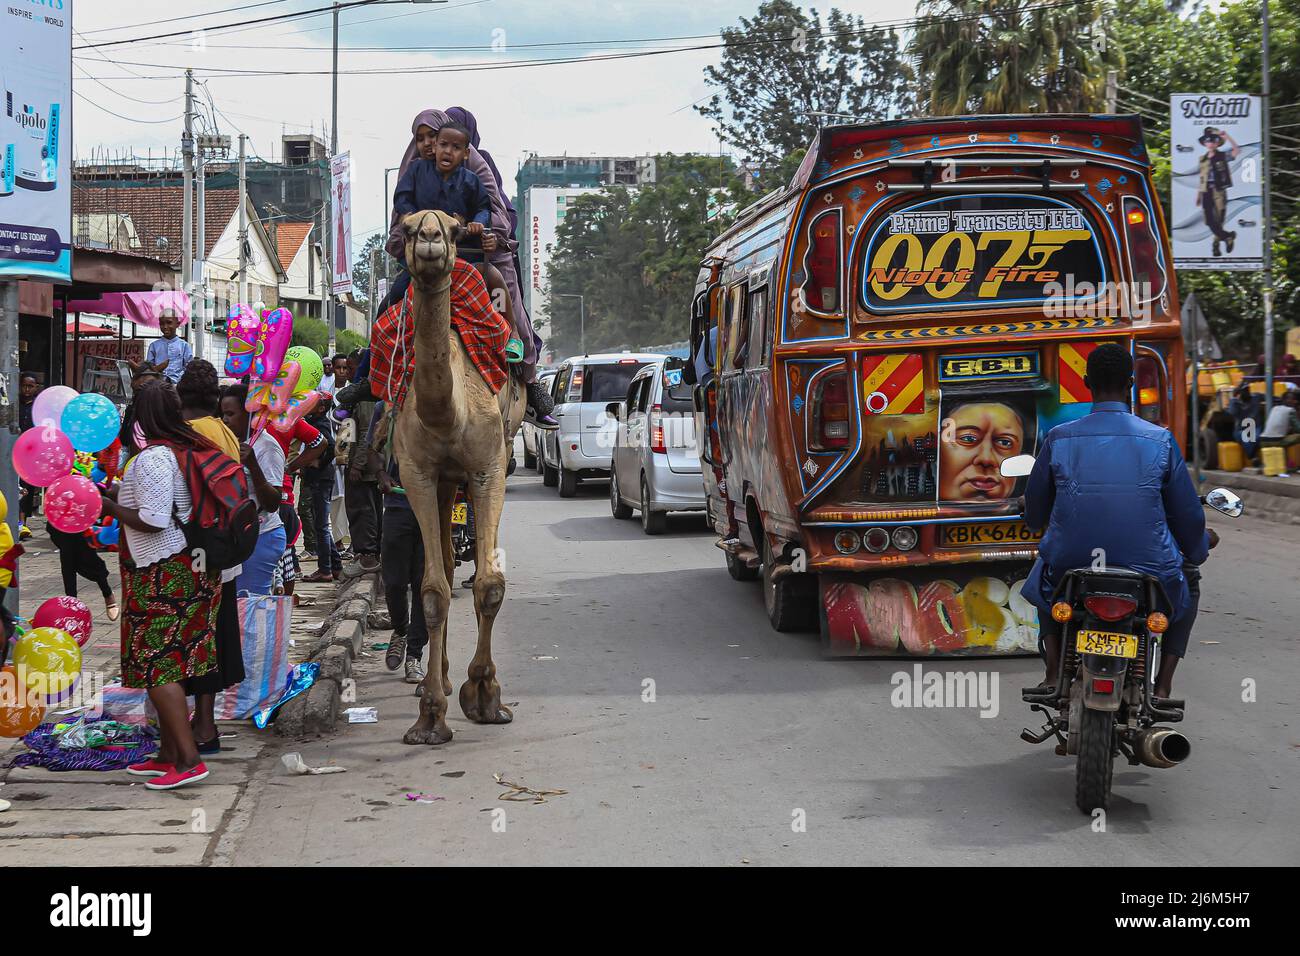 Kenyan Somali children enjoy a Carmel ride along Muratina road Eastleigh, during Eid-Ul-Fitr celebrations. Muslims in Kenya celebrate Eid-Ul-Fitr which marks the end of the Holy month of Ramadhan. (Photo by Boniface Muthoni / SOPA Images/Sipa USA) Stock Photo